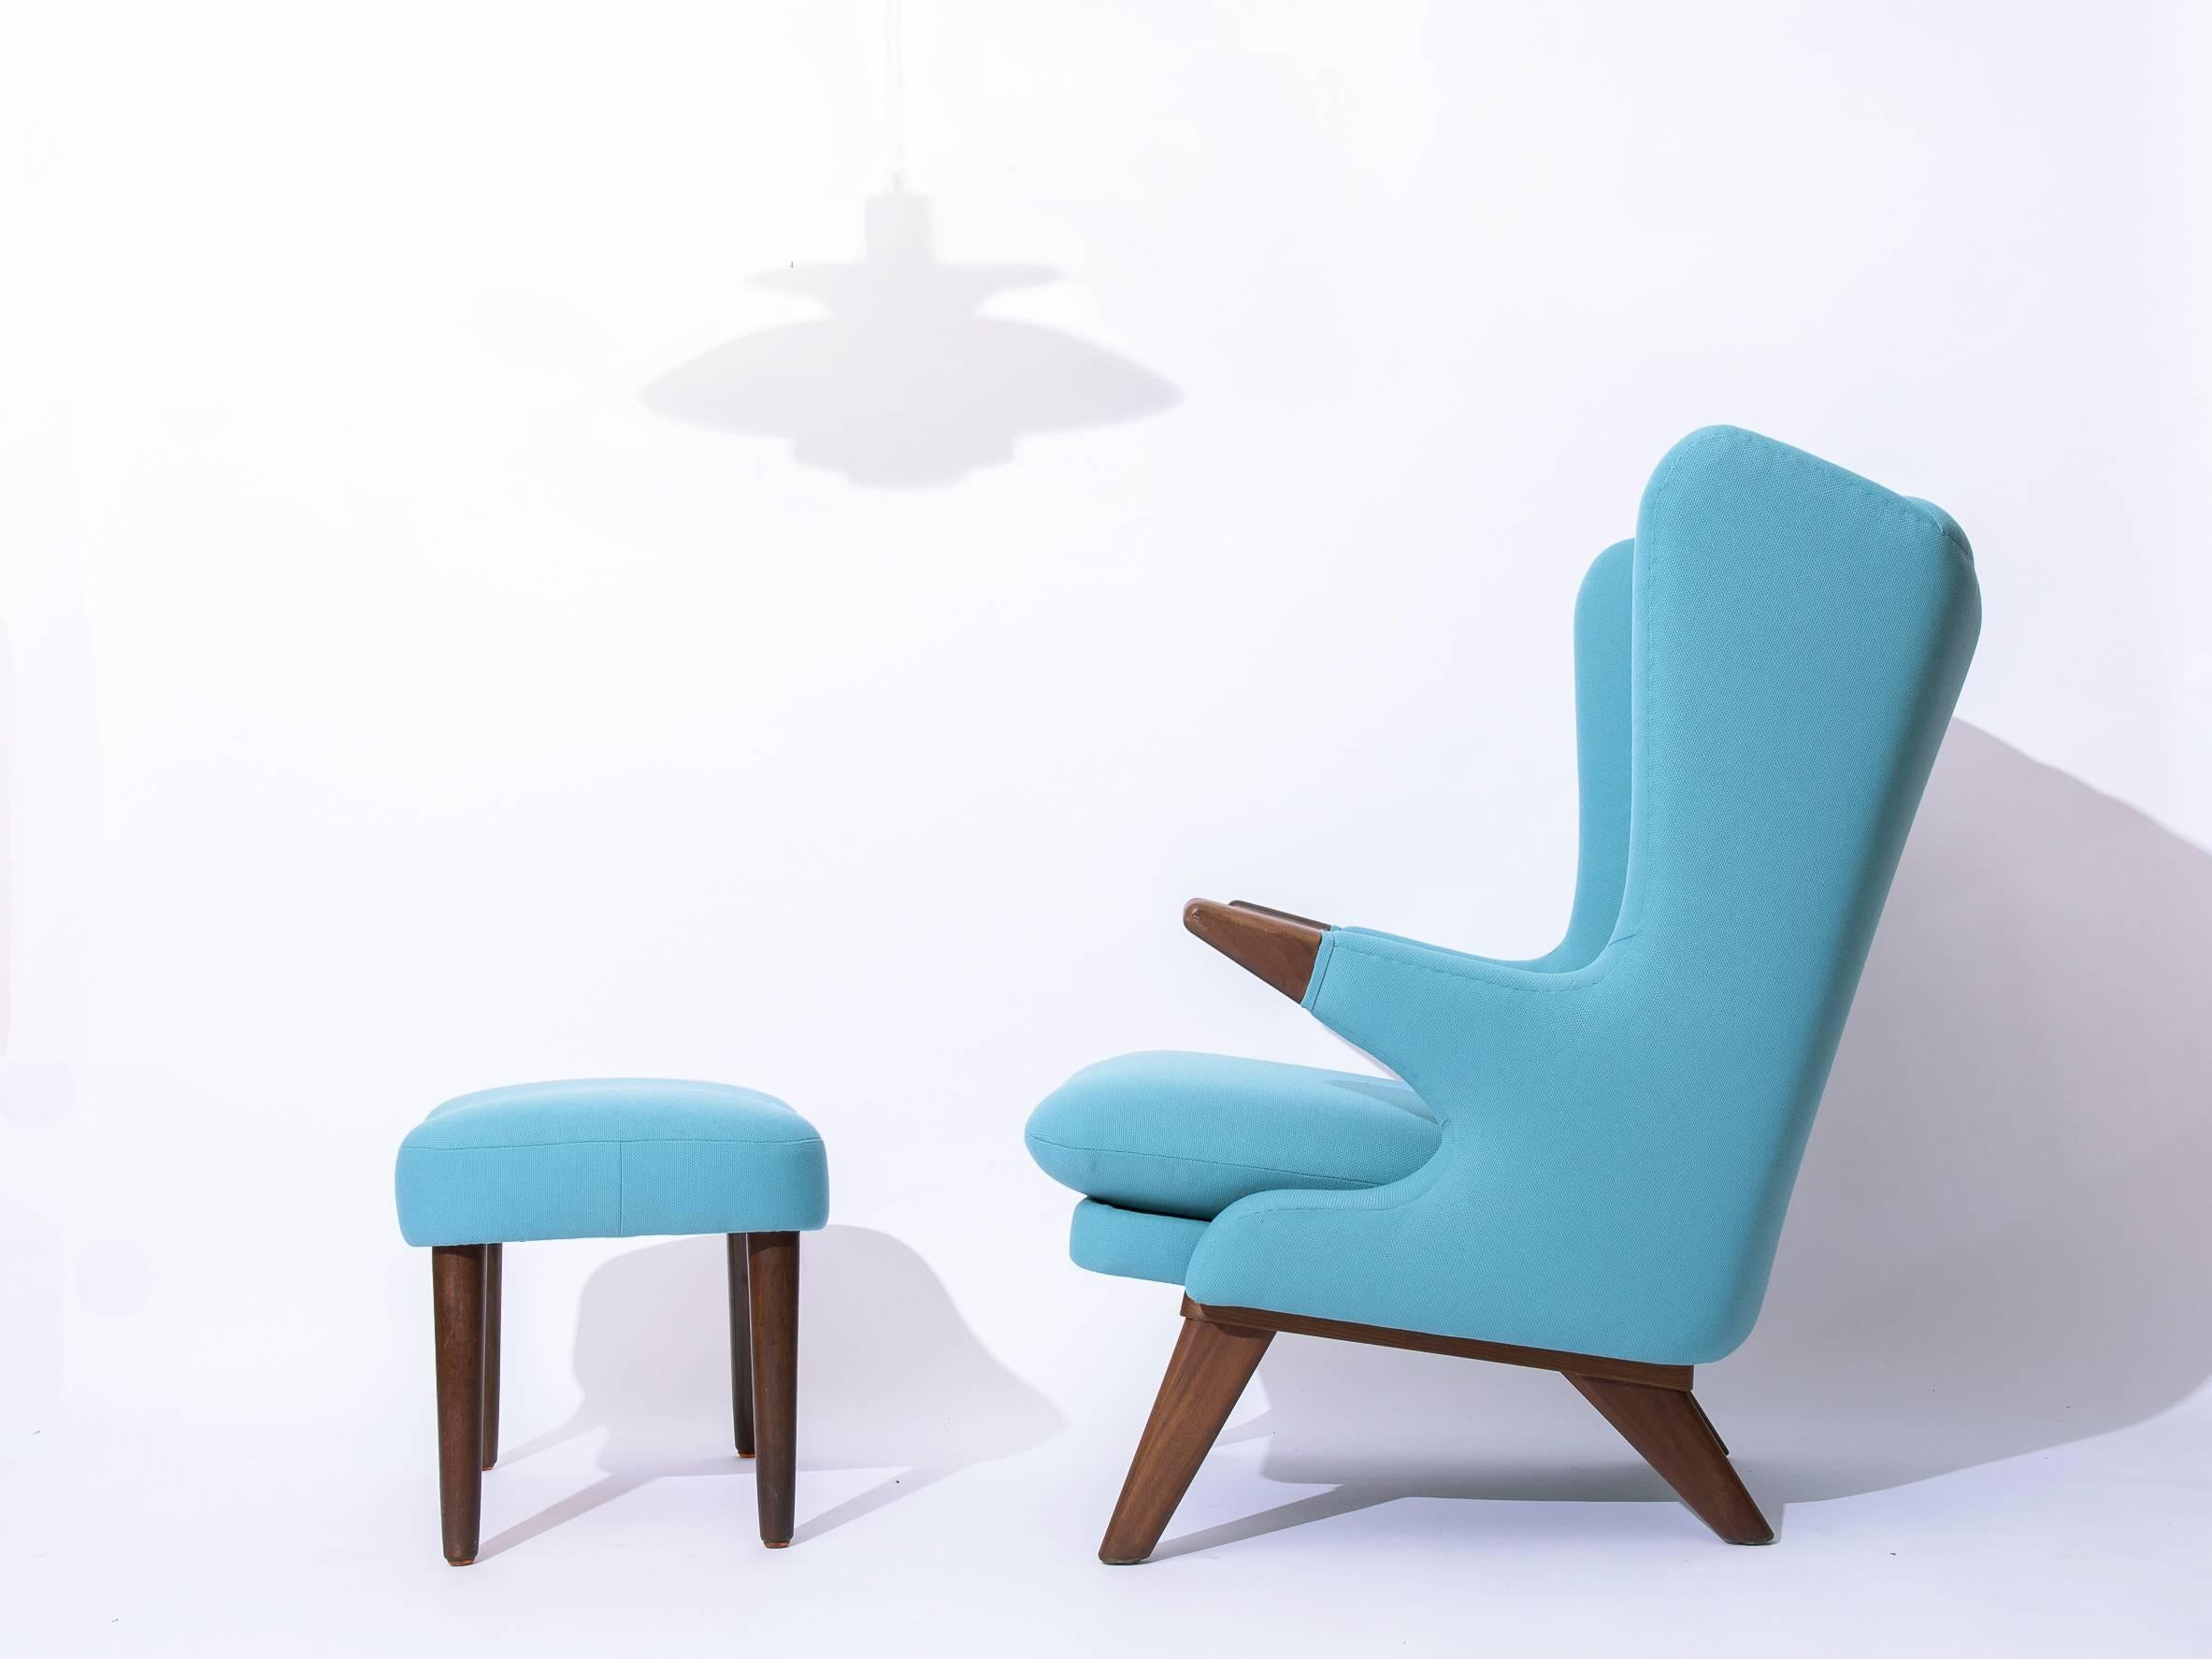 Wingback Lounge Teak Chair with Footstool in soft turquoise, Model 91 